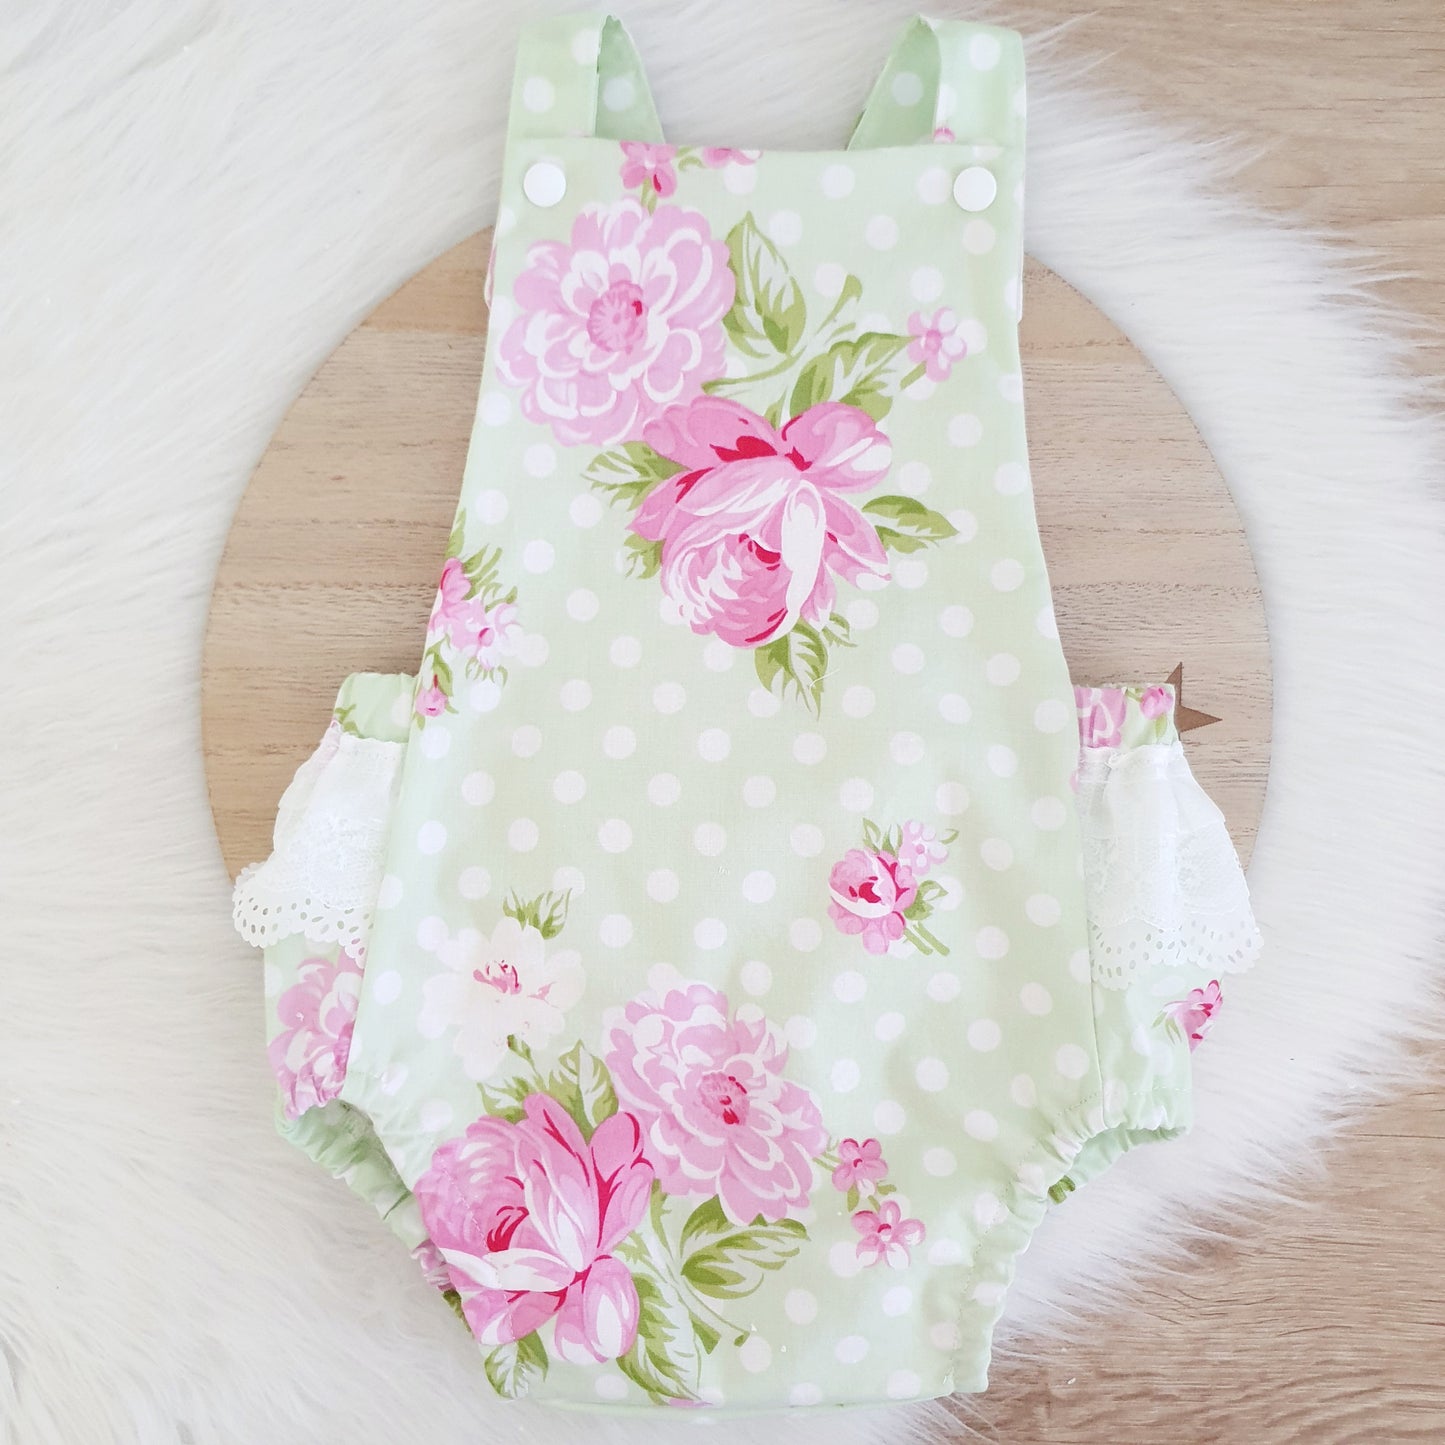 ROSEY GREEN Baby Romper with trim, Handmade Baby Clothing, Size 1 - 1st Birthday Clothing / Cake Smash Outfit, 12 - 18 months